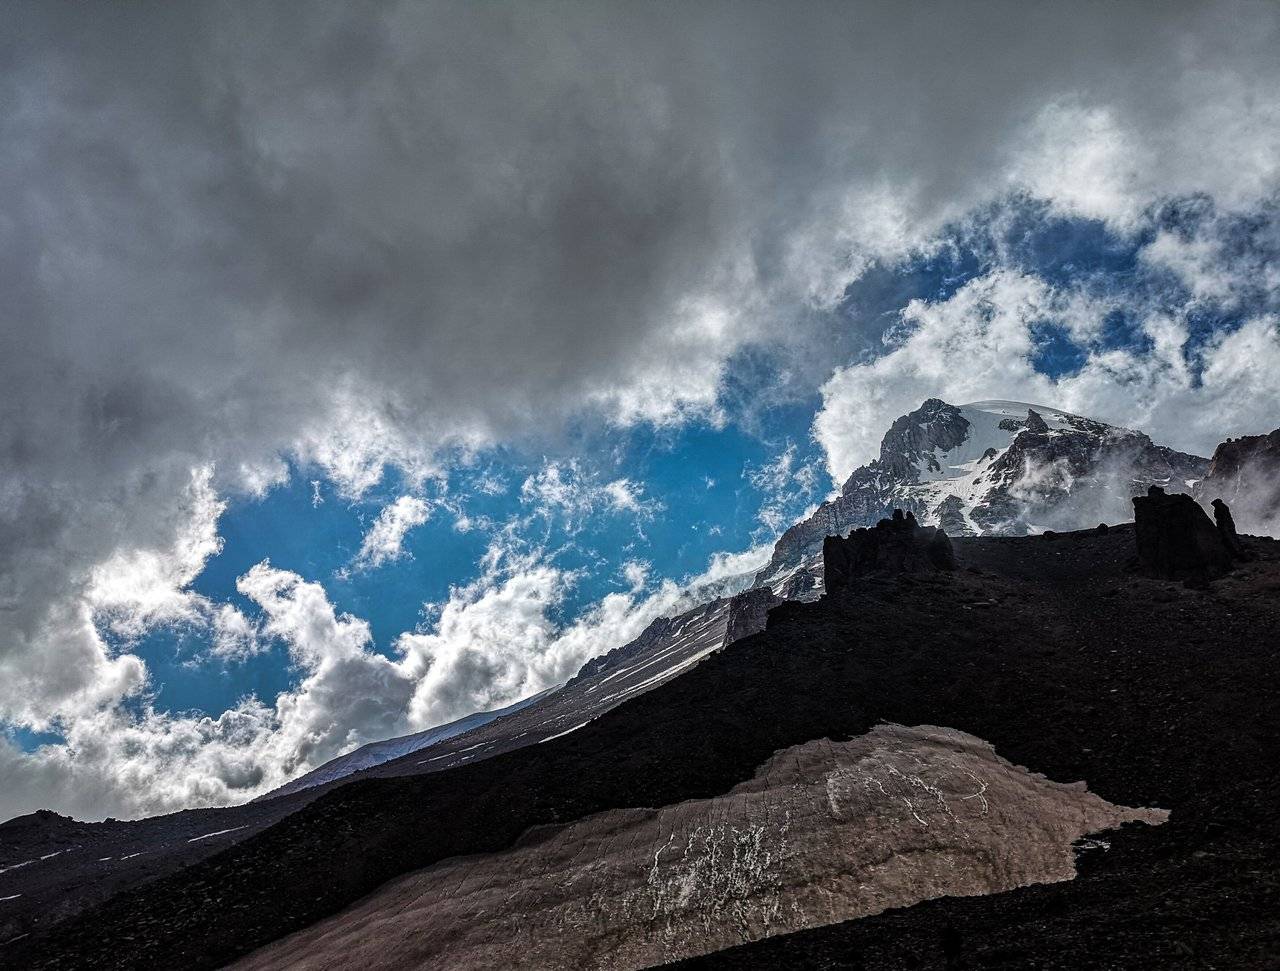 mount-kazbek-surrounded-by-clouds.jpg